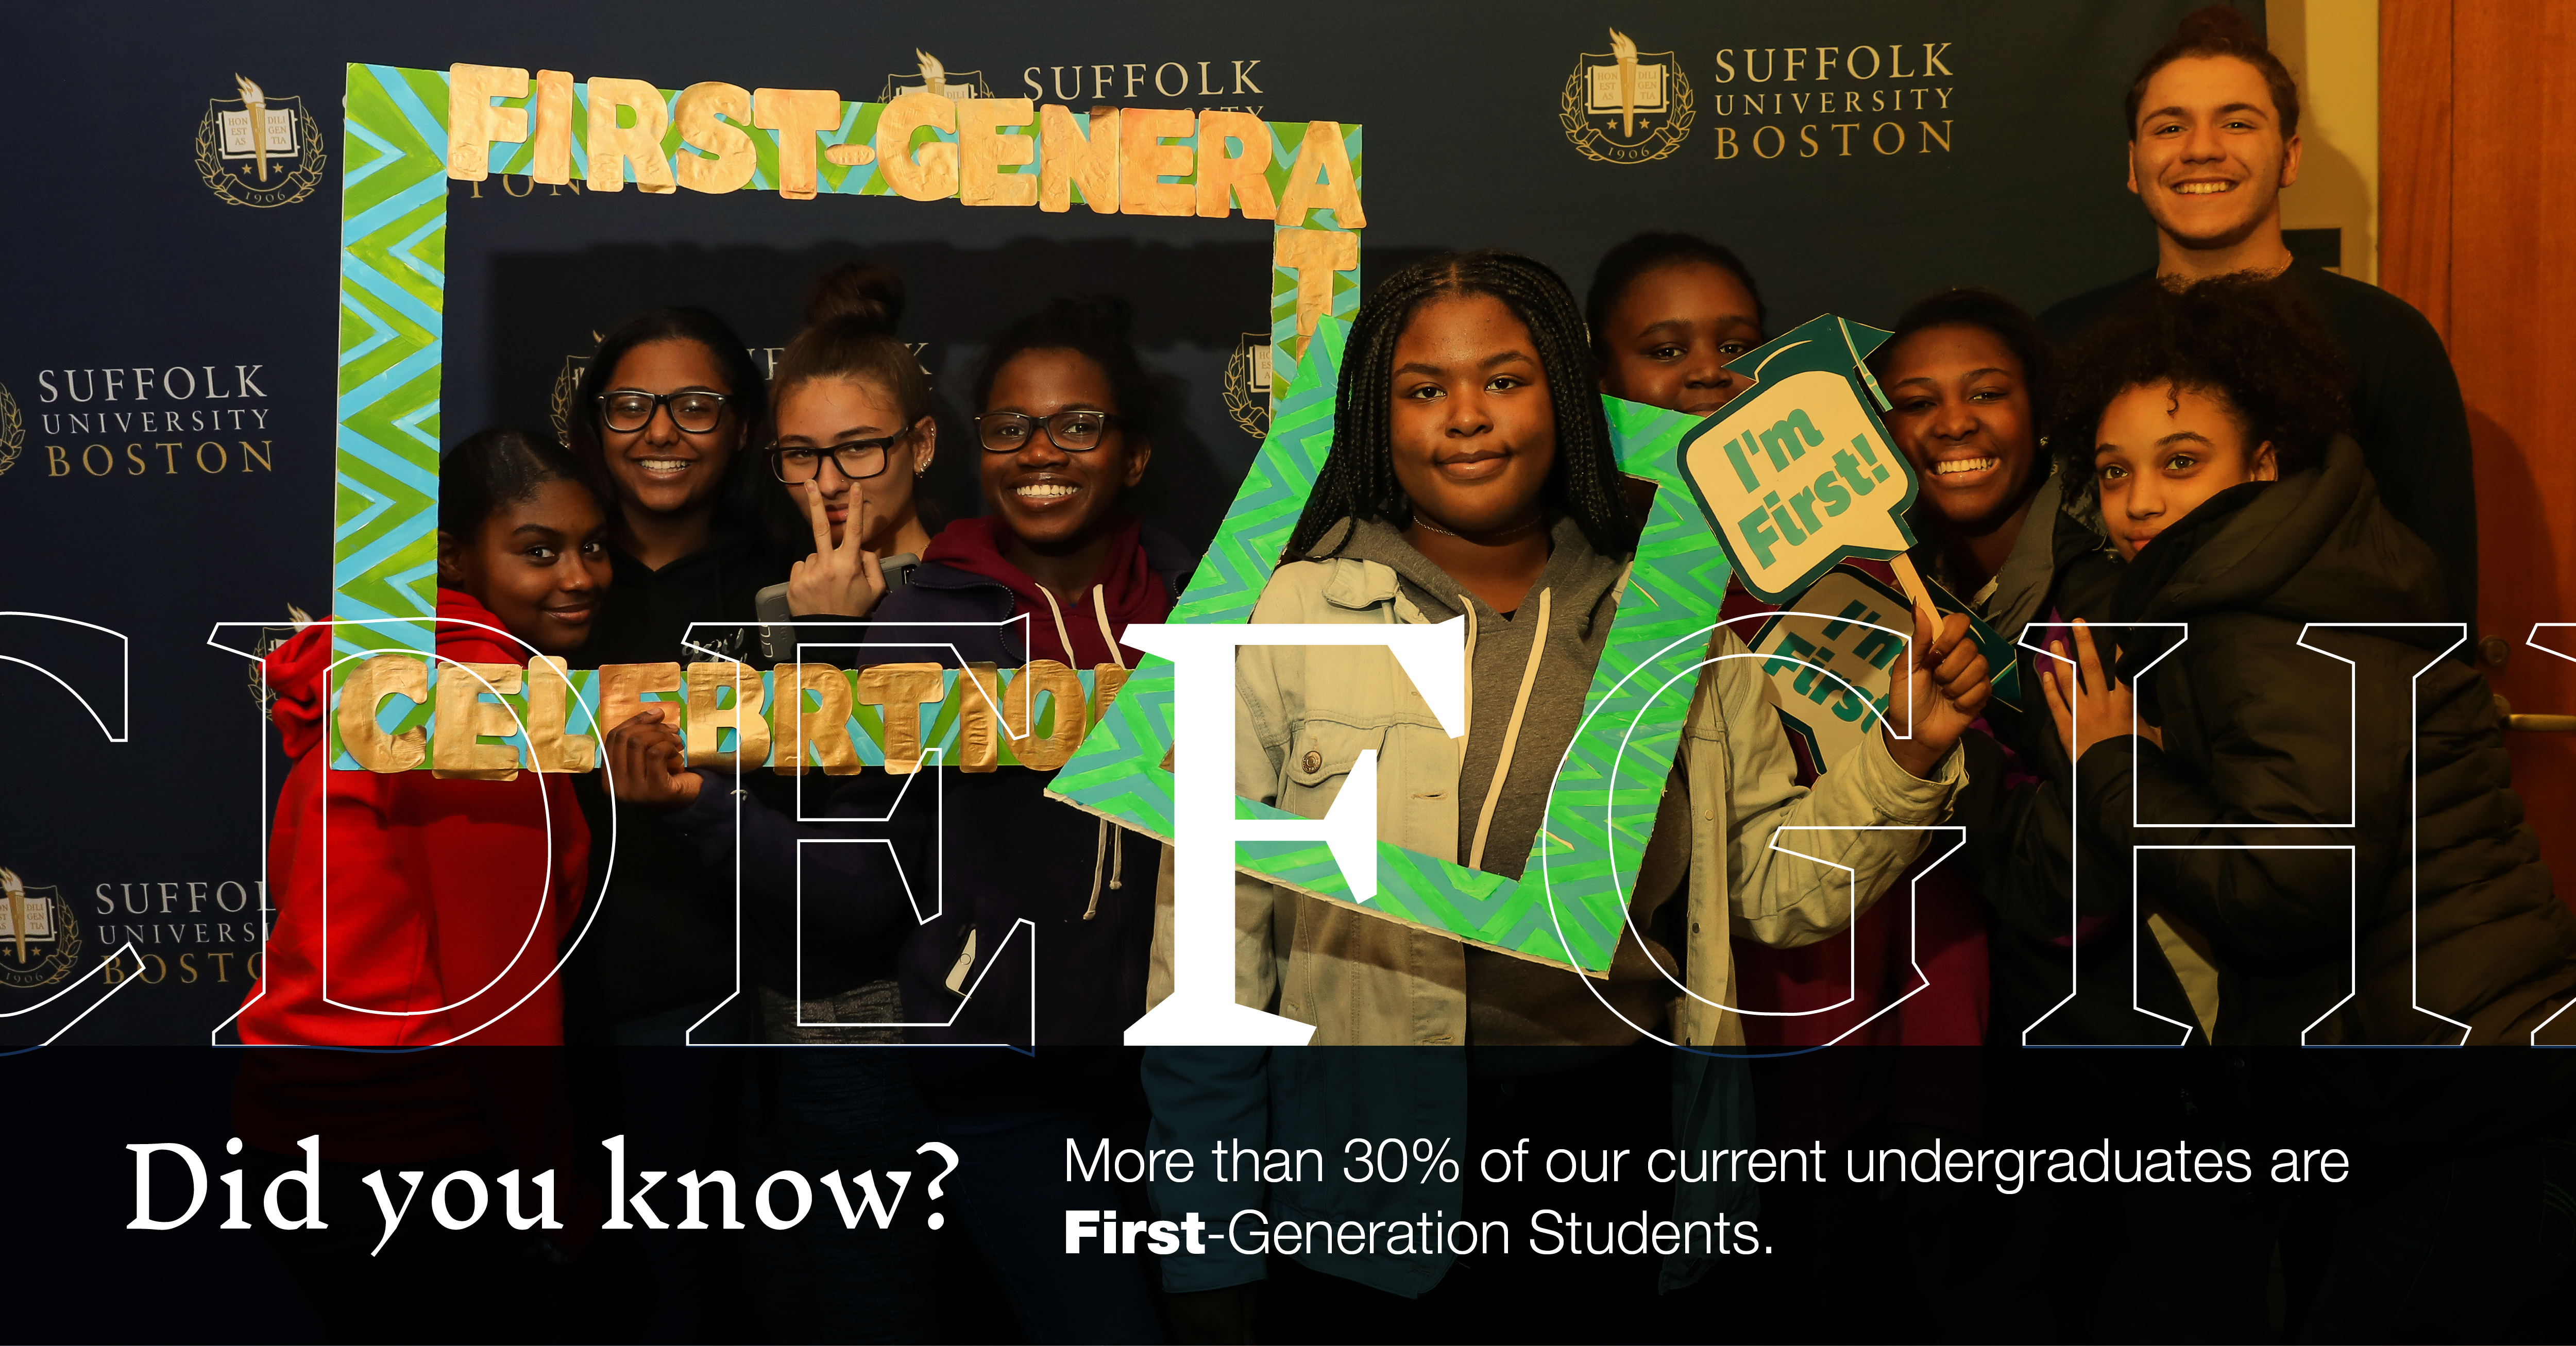 Image of first-generation students at a First Gen celebration: "Did you know more than 30% of our current undergraduates are first-generation students?"